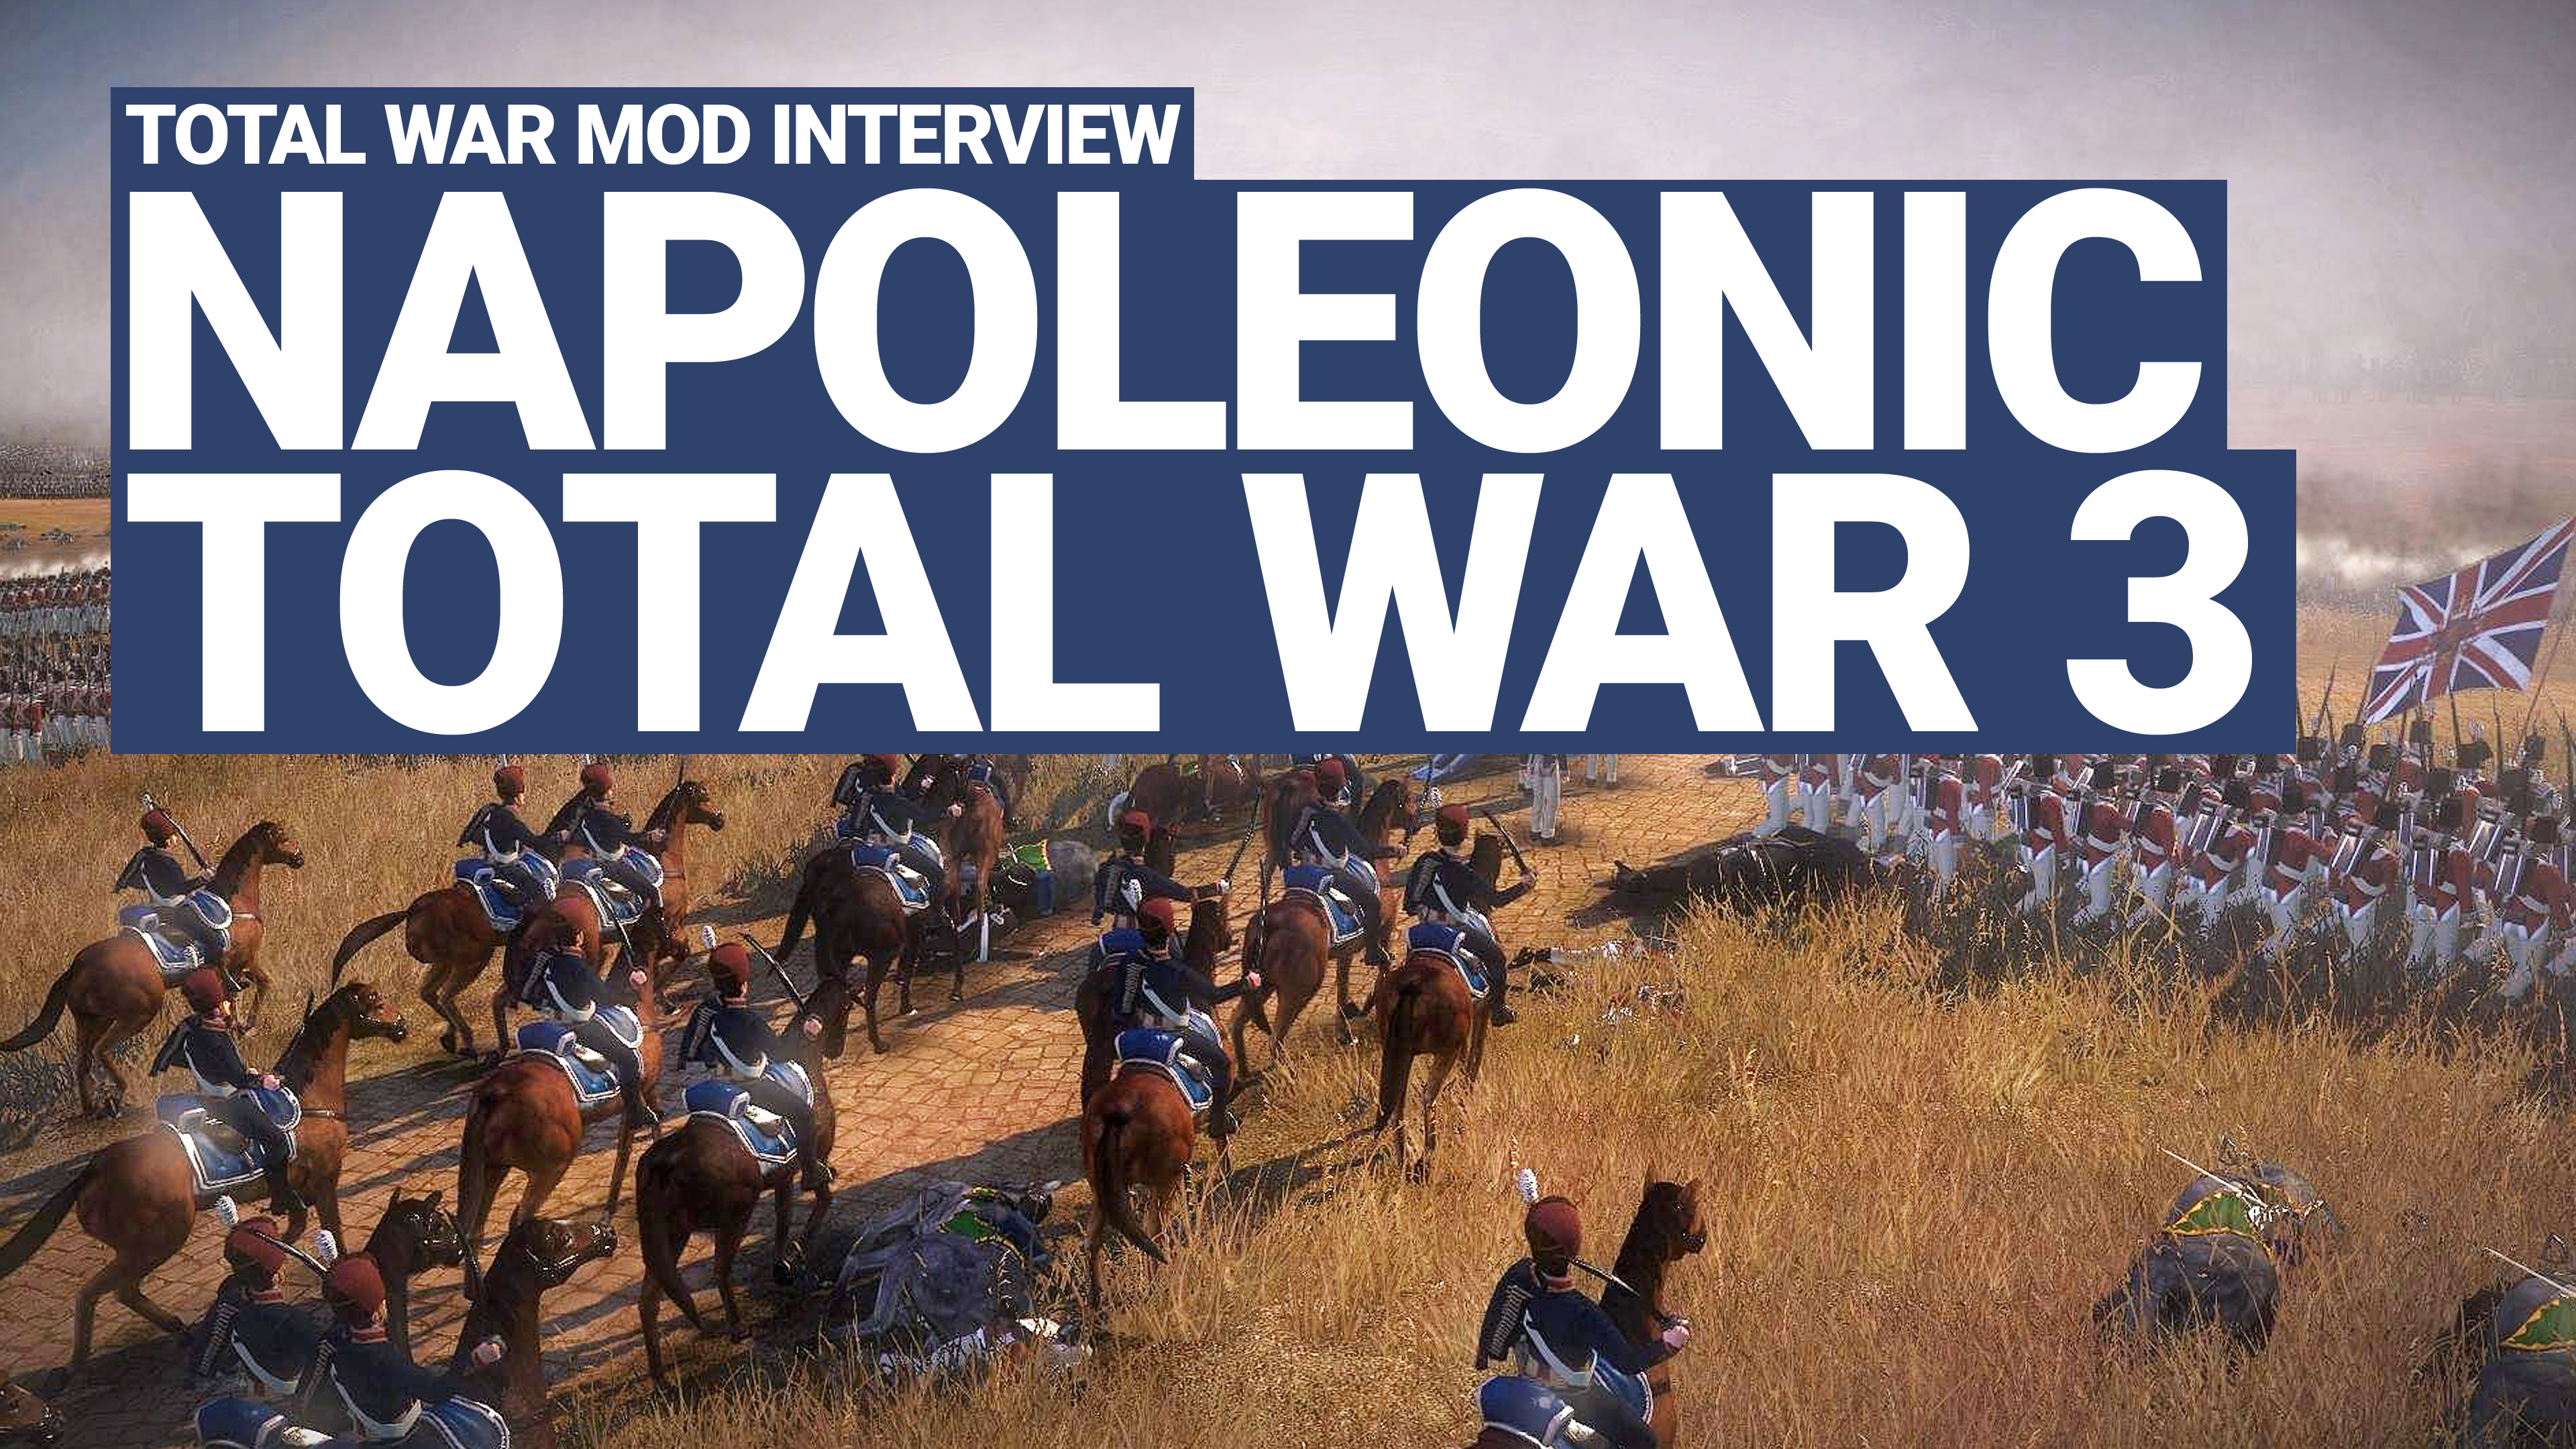 napoleon total war multiplayer campaign